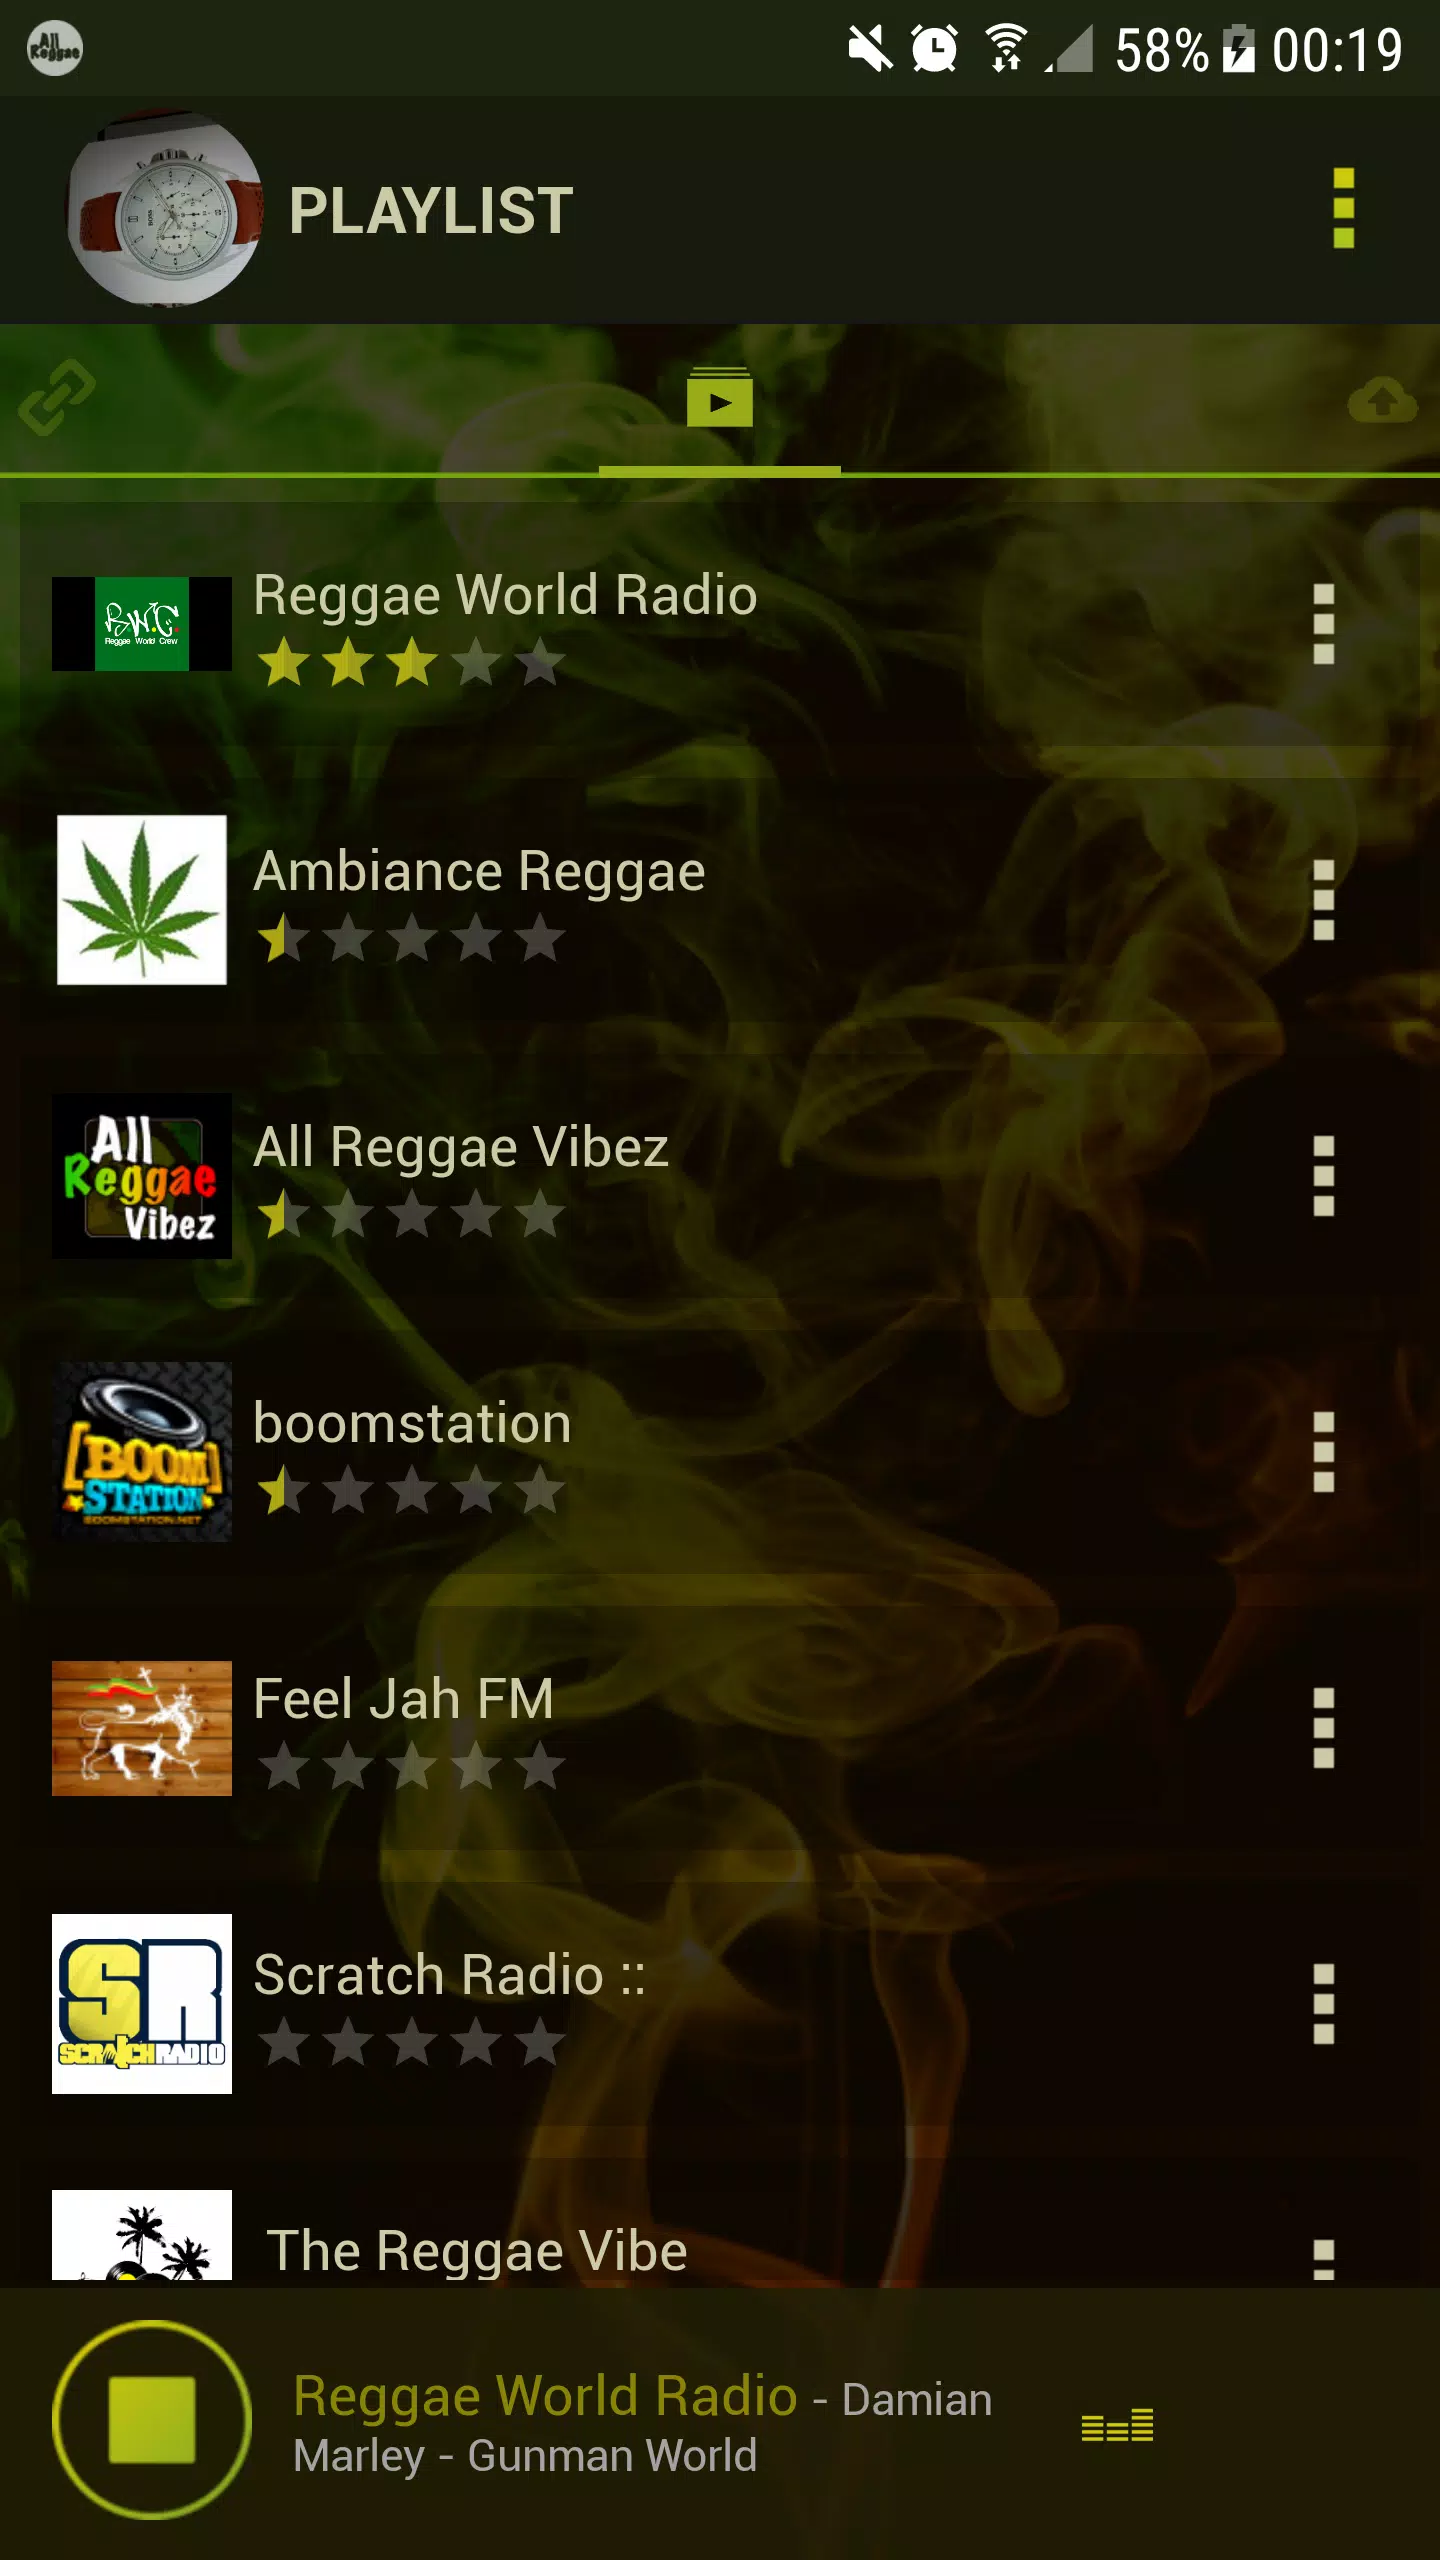 All Reggae for Android - APK Download